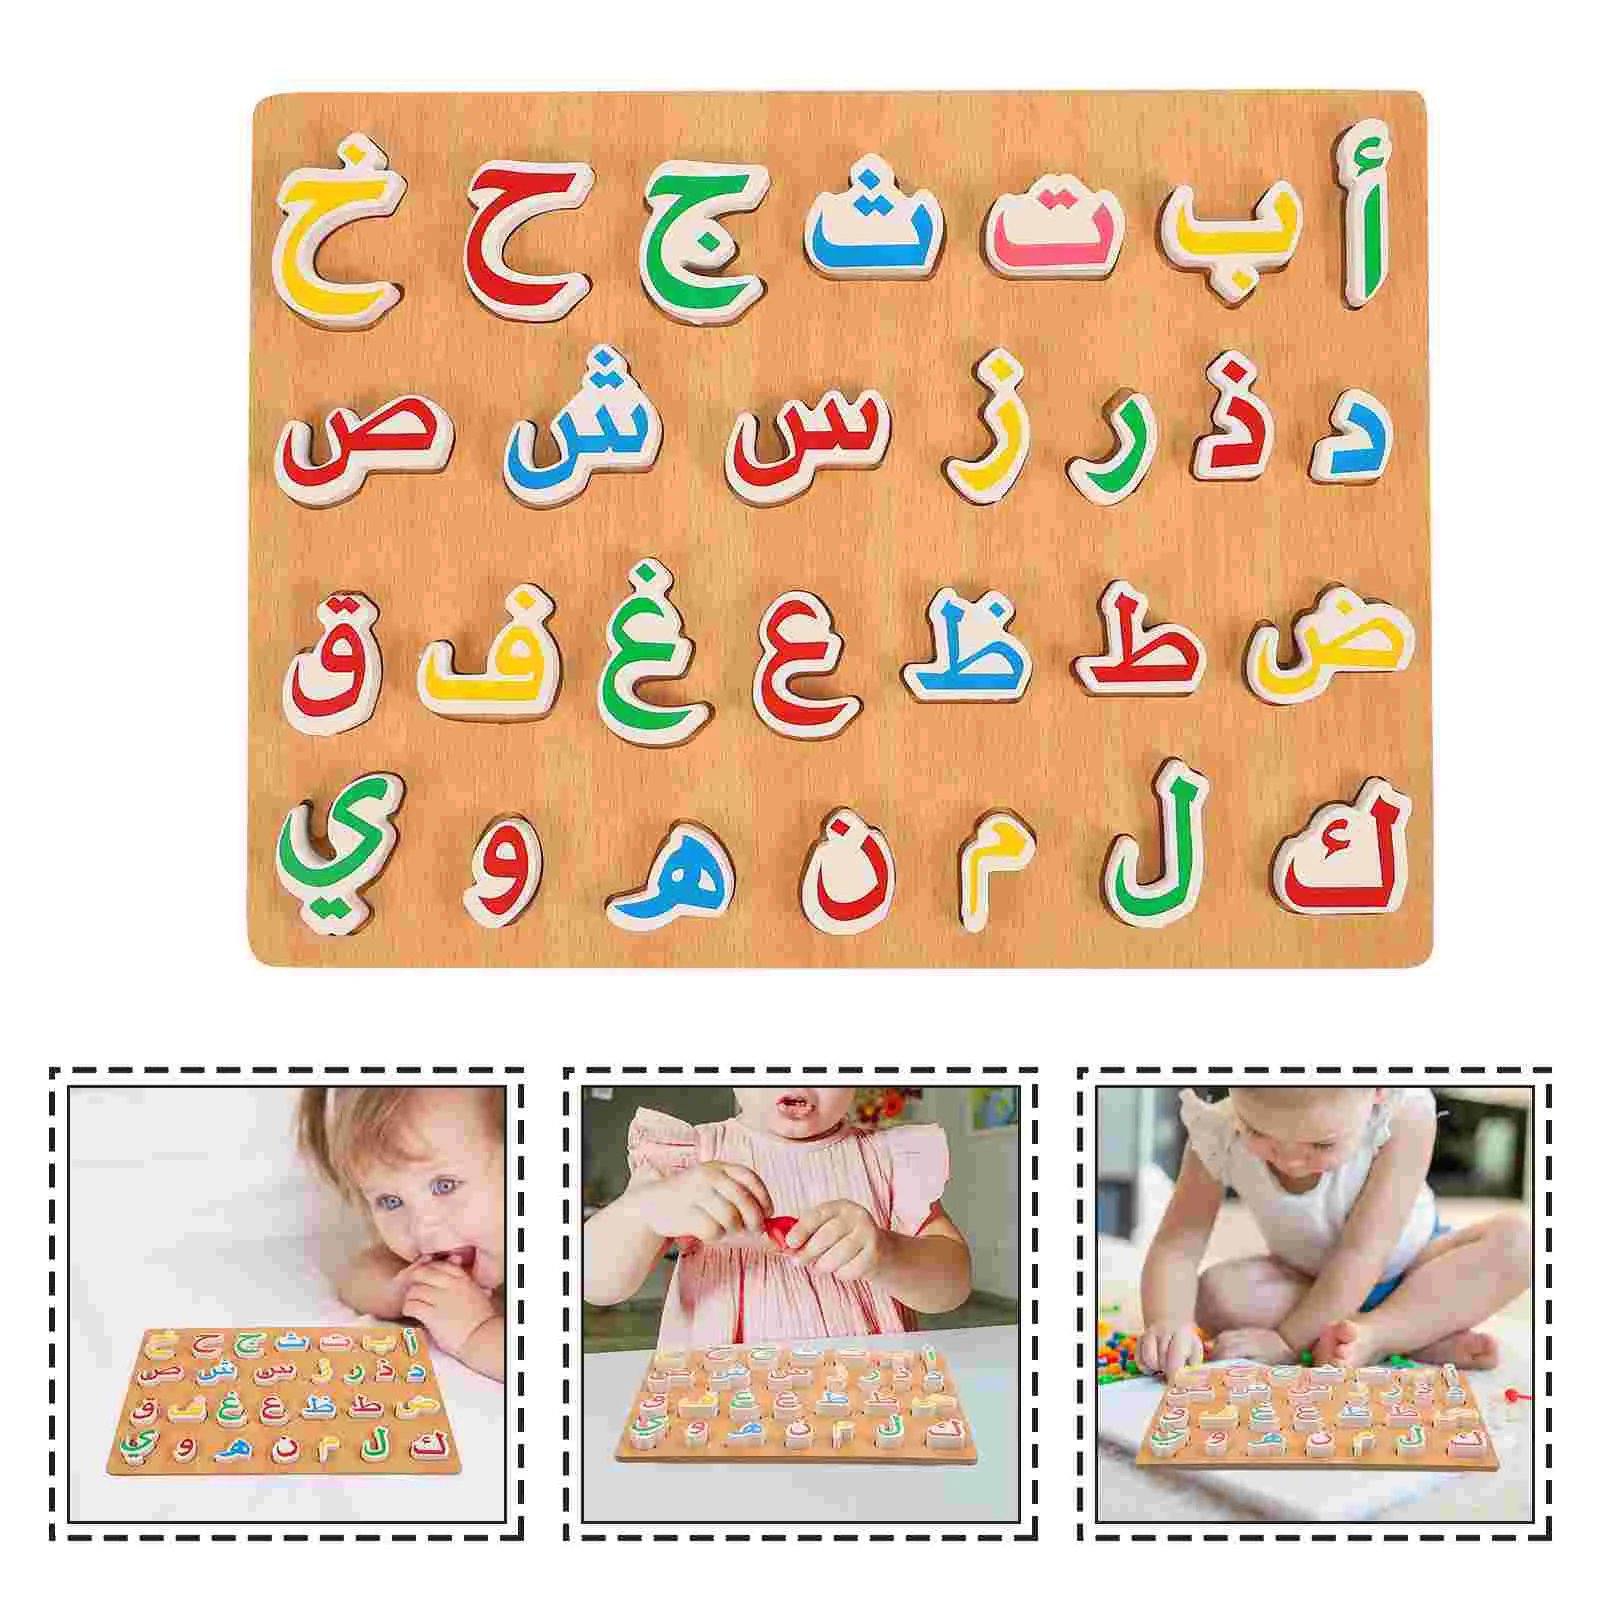 

Arabic Puzzle Kids Plaything Early Educational Toy Girl Toddler Toys Logic Jigsaw Matching Logical Wooden